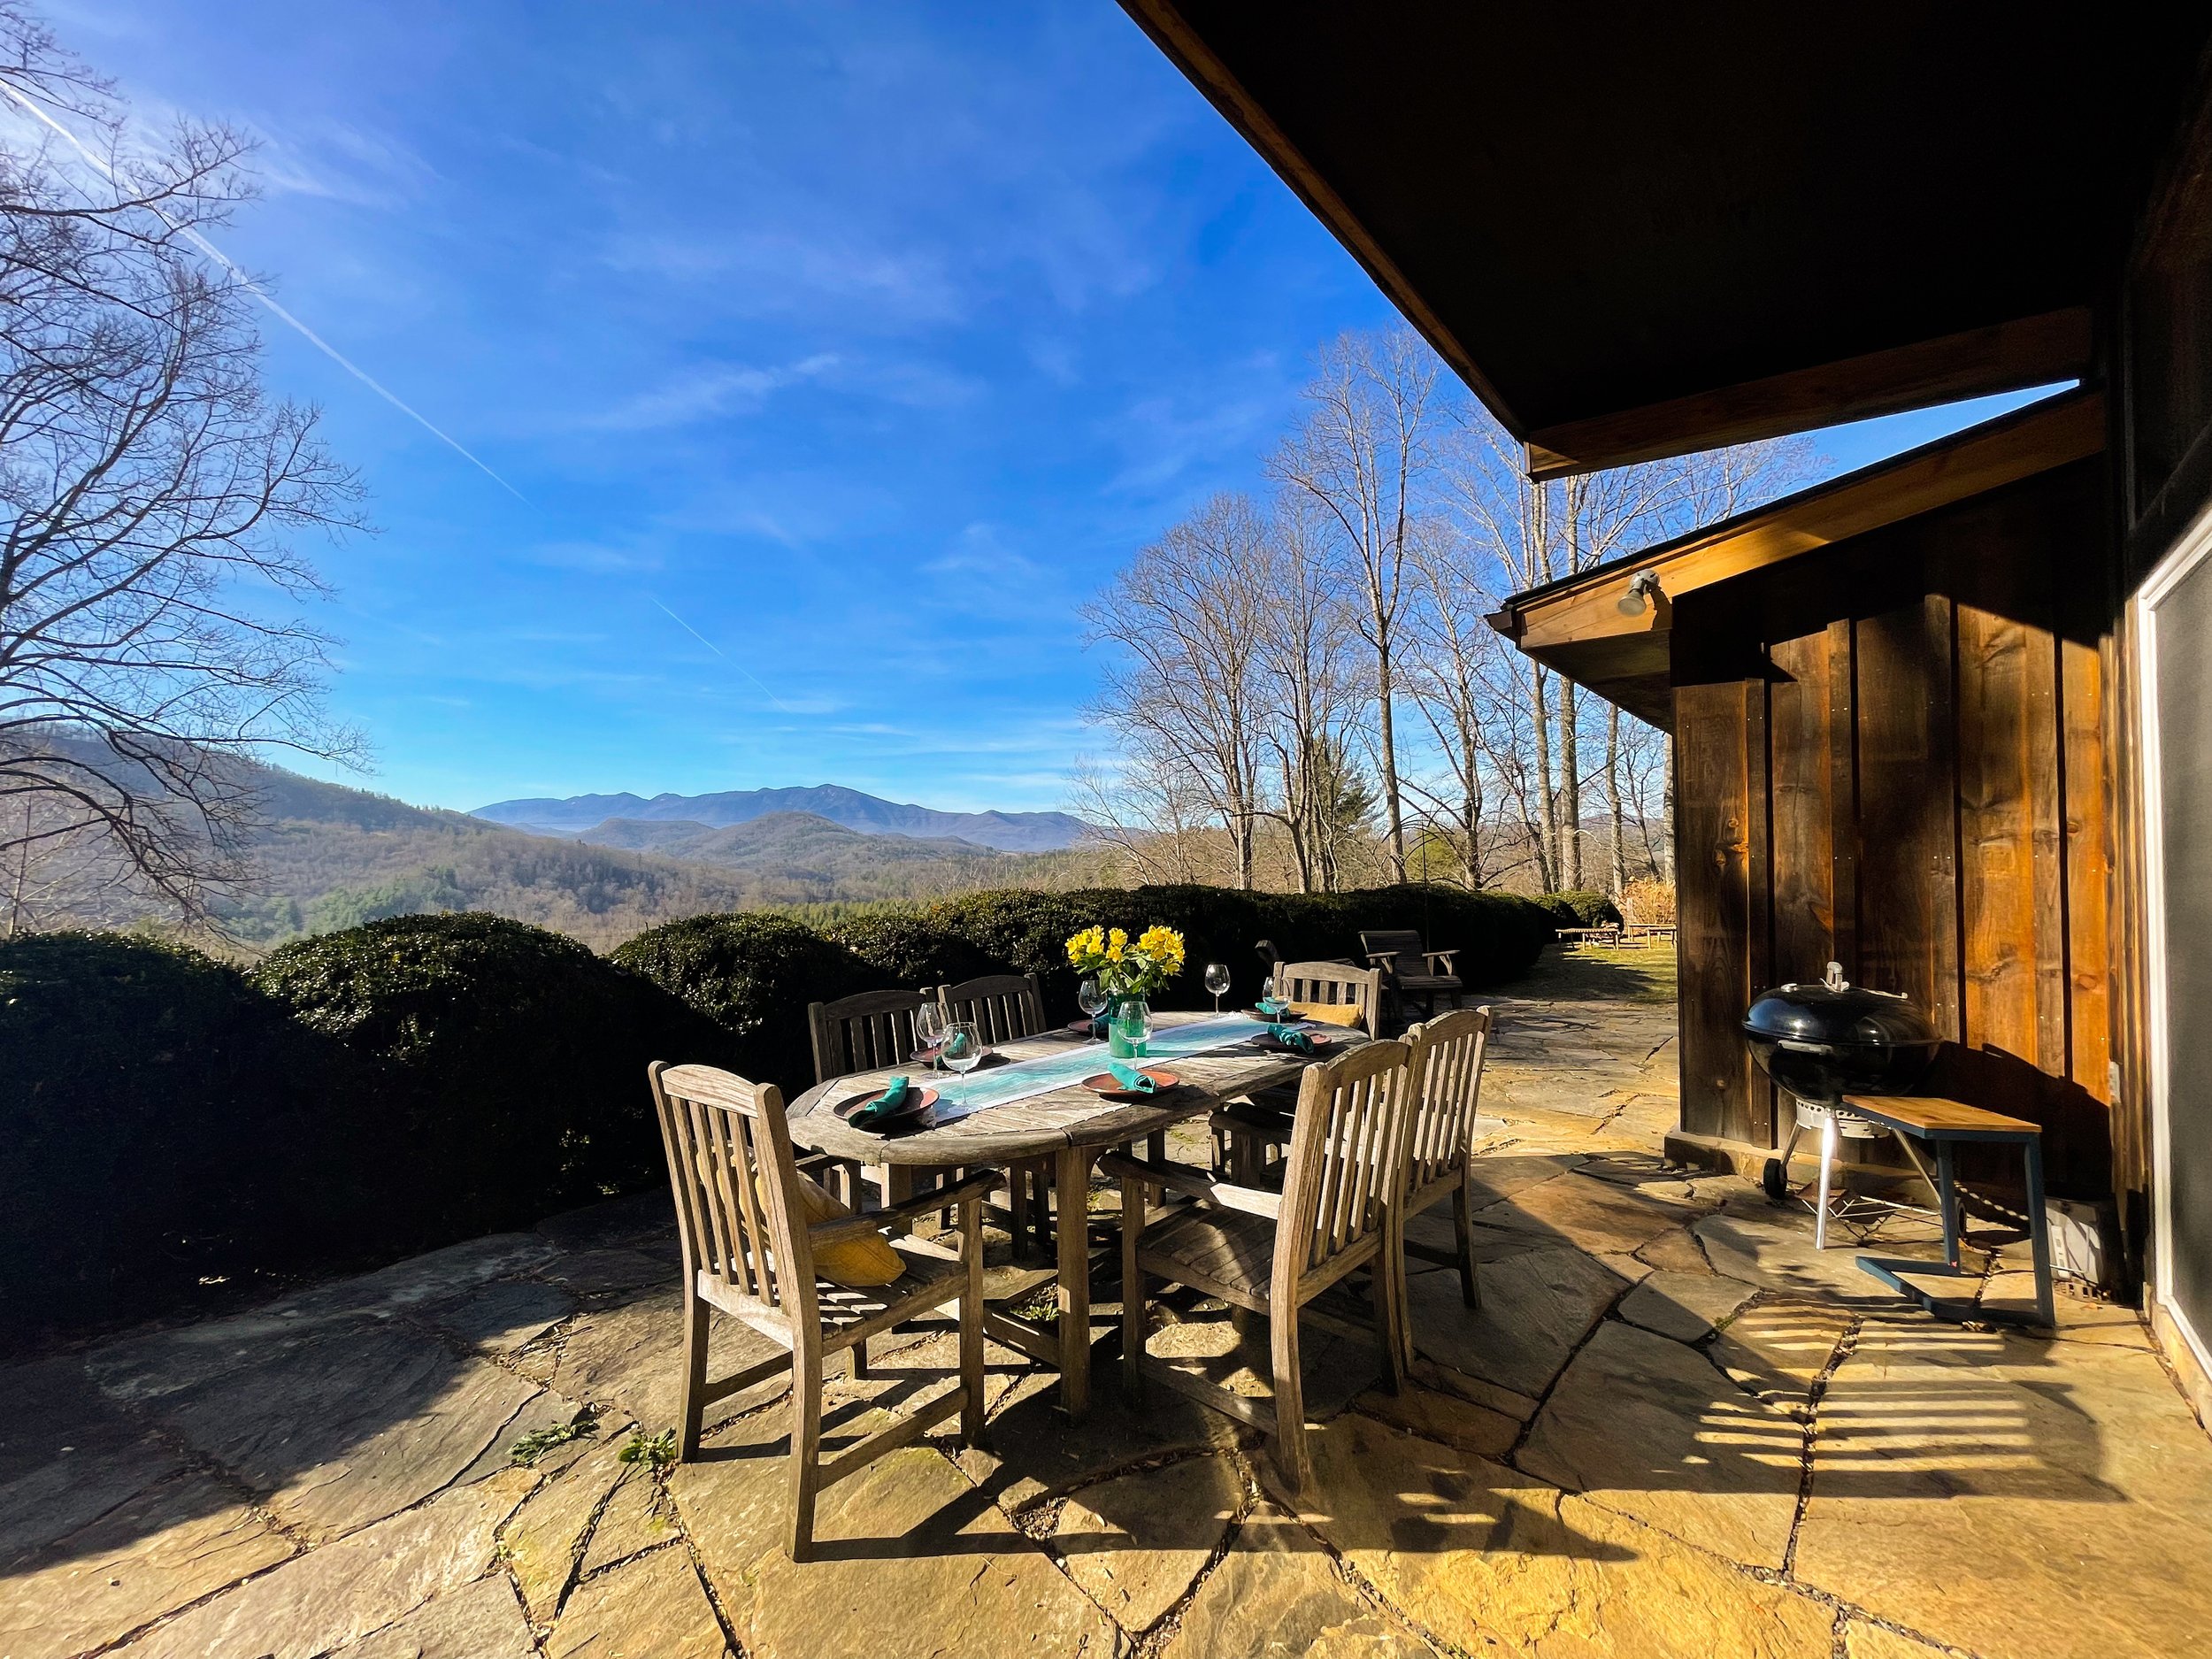  The house features a grill, firepot, plenty of outdoor seating, and more gorgeous views! 